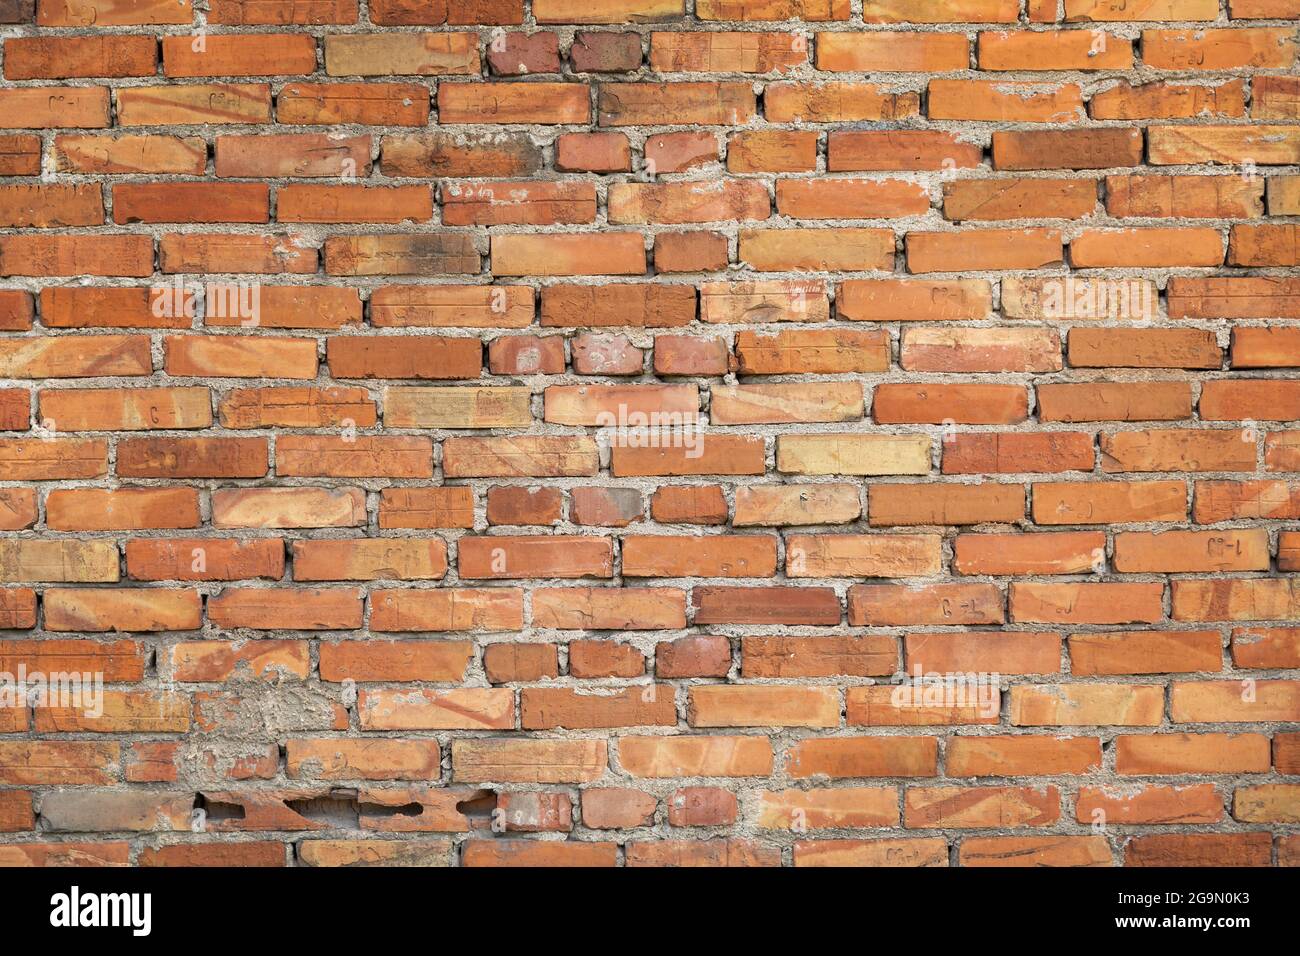 Wall made of red bricks as a background Stock Photo